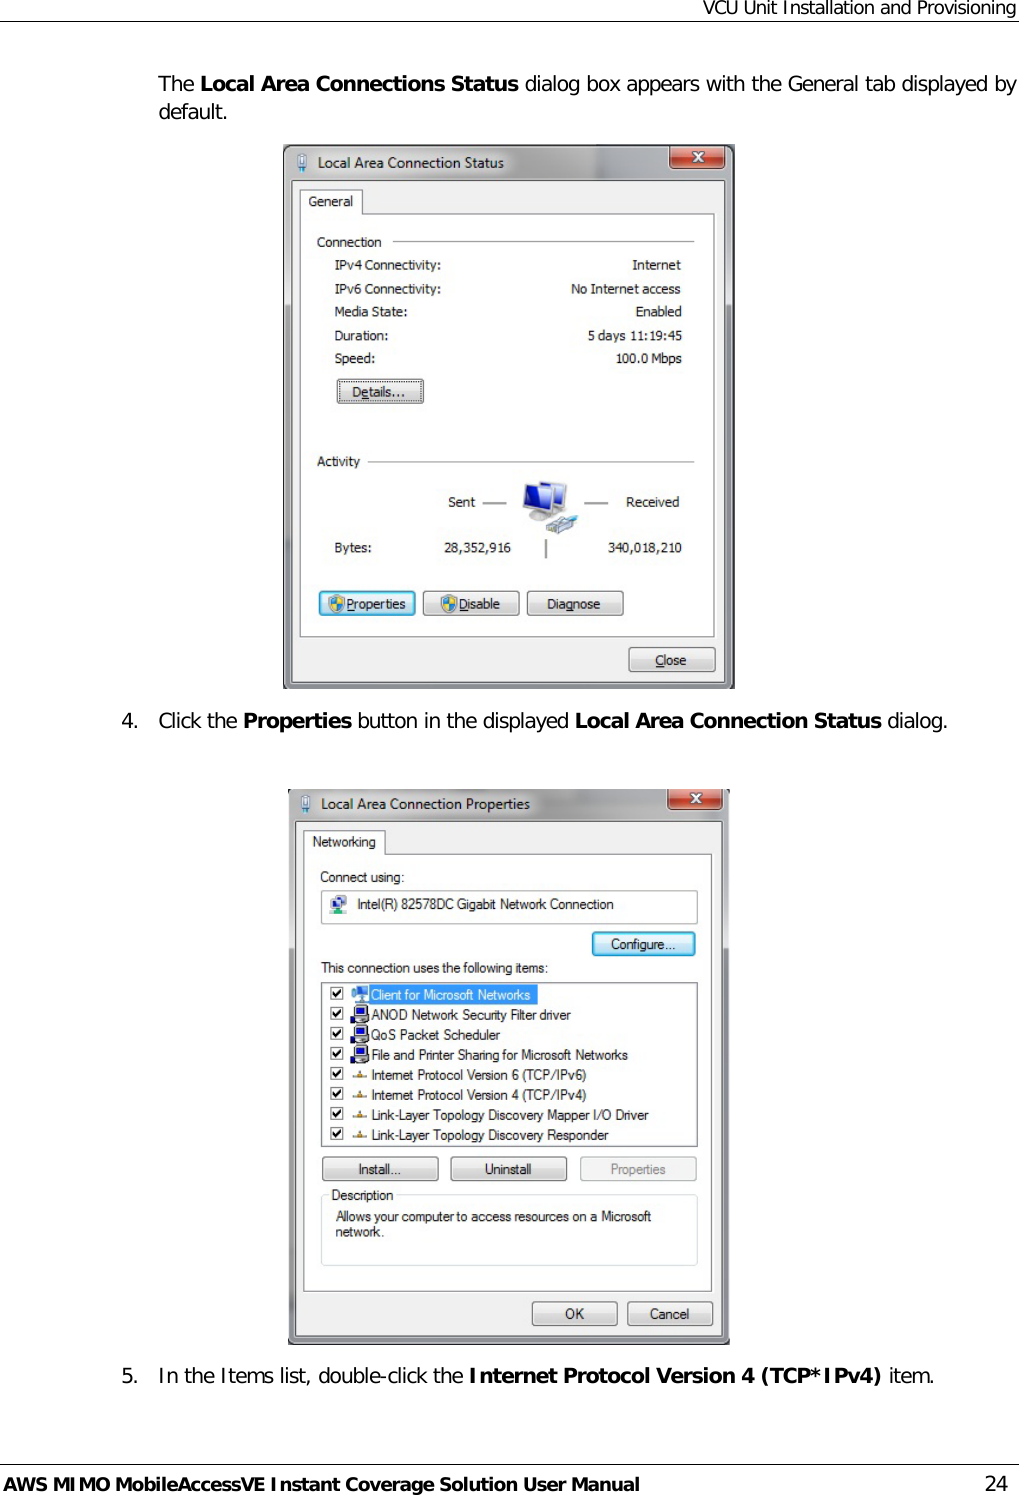 VCU Unit Installation and Provisioning AWS MIMO MobileAccessVE Instant Coverage Solution User Manual  24 The Local Area Connections Status dialog box appears with the General tab displayed by default.  4.  Click the Properties button in the displayed Local Area Connection Status dialog.   5.  In the Items list, double-click the Internet Protocol Version 4 (TCP*IPv4) item.  